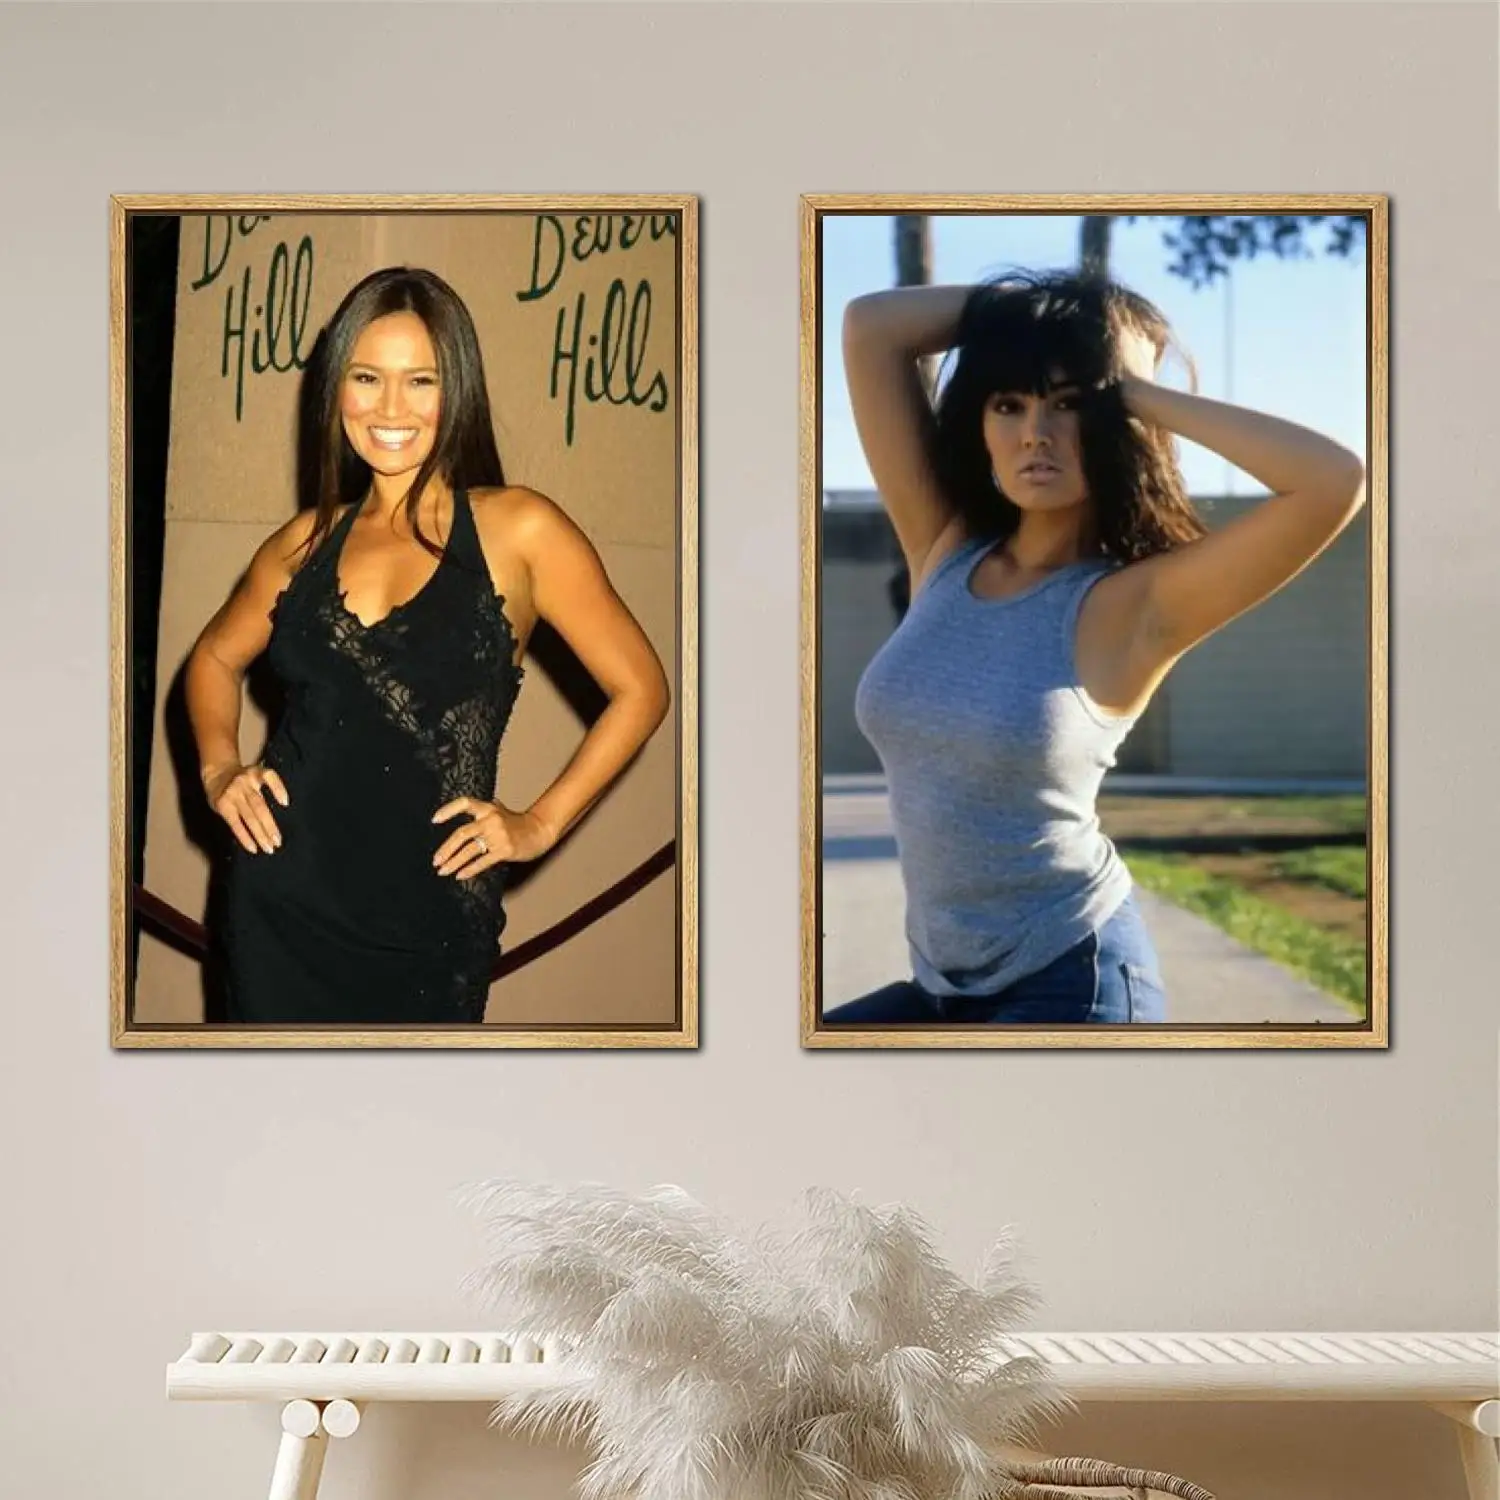 

Tia Carrere Poster Painting 24x36 Wall Art Canvas Posters room decor Modern Family bedroom Decoration Art wall decor